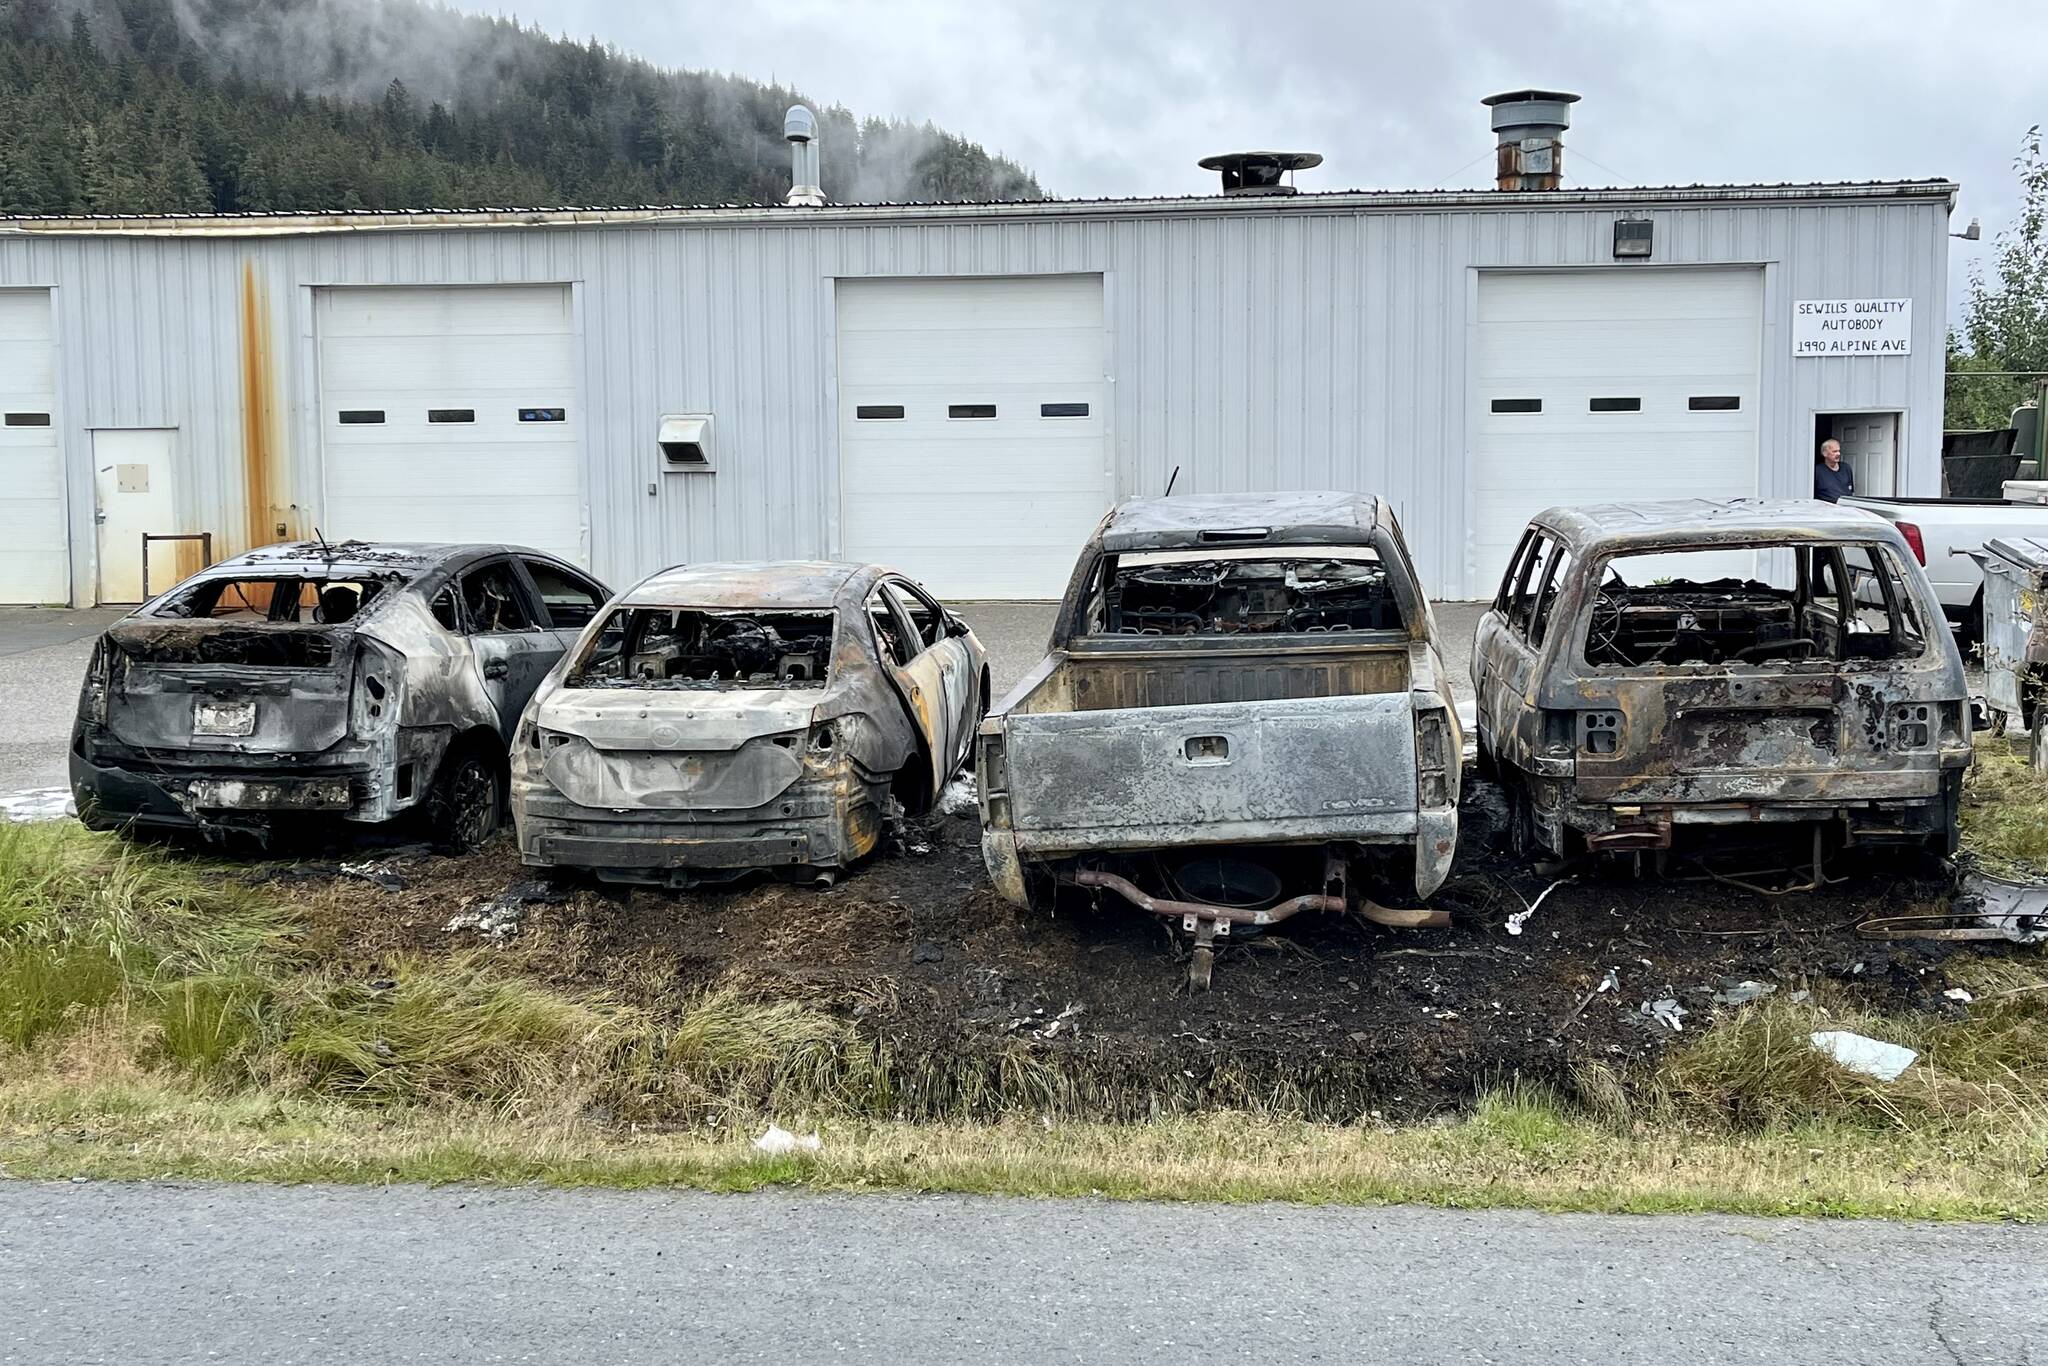 Jonson Kuhn / Juneau Empire
Capital City Fire/Rescue responded to fire at Sewillis Quality Auto Body at 5 a.m., according to CCFR. No injuries or damage to structures was reported.